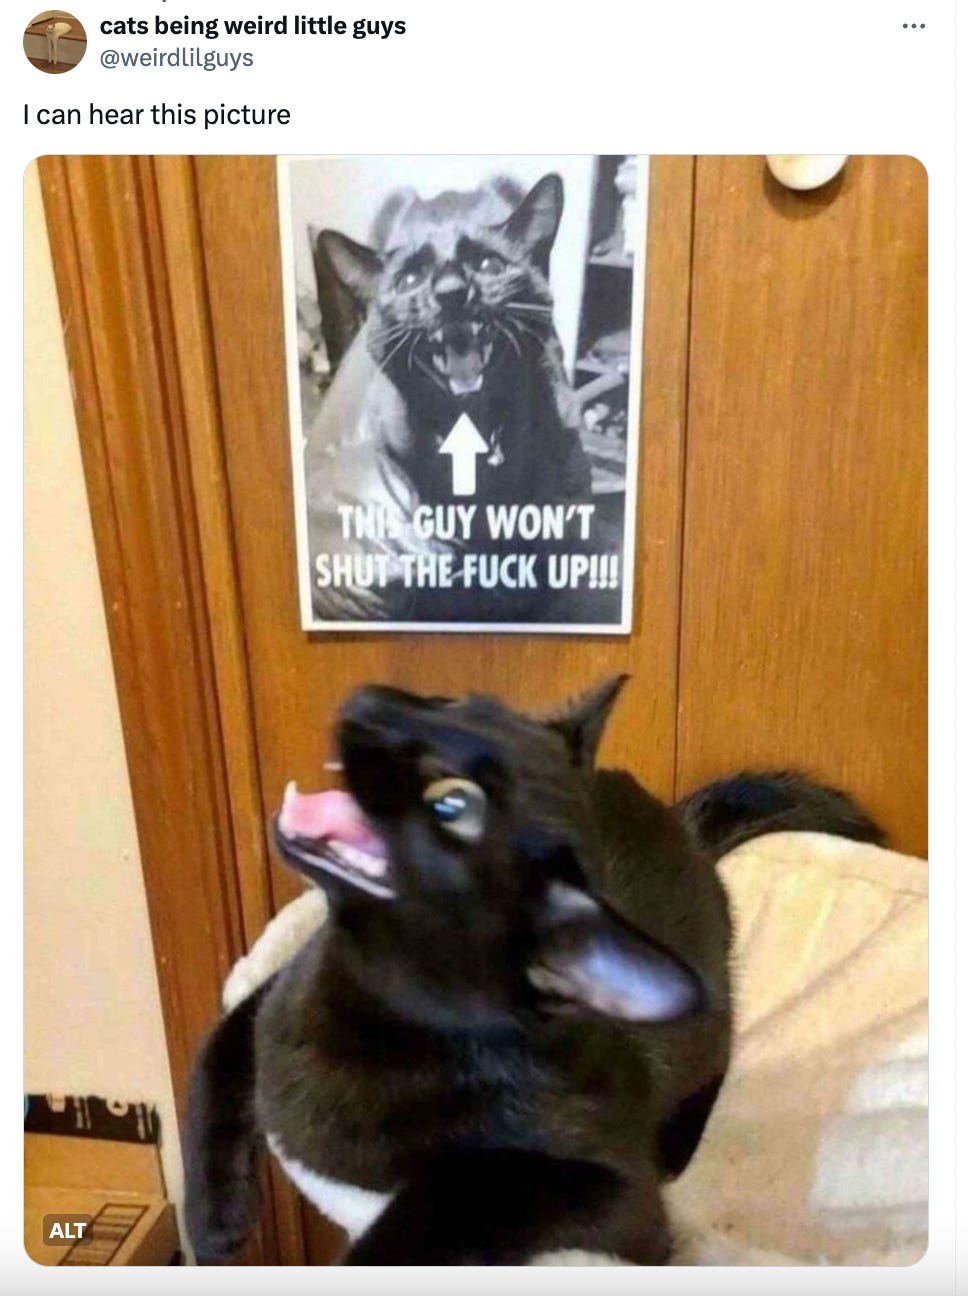 black cat screaming in front of a sign with a picture of him that says “this guy won’t shut the fuck up!!!”